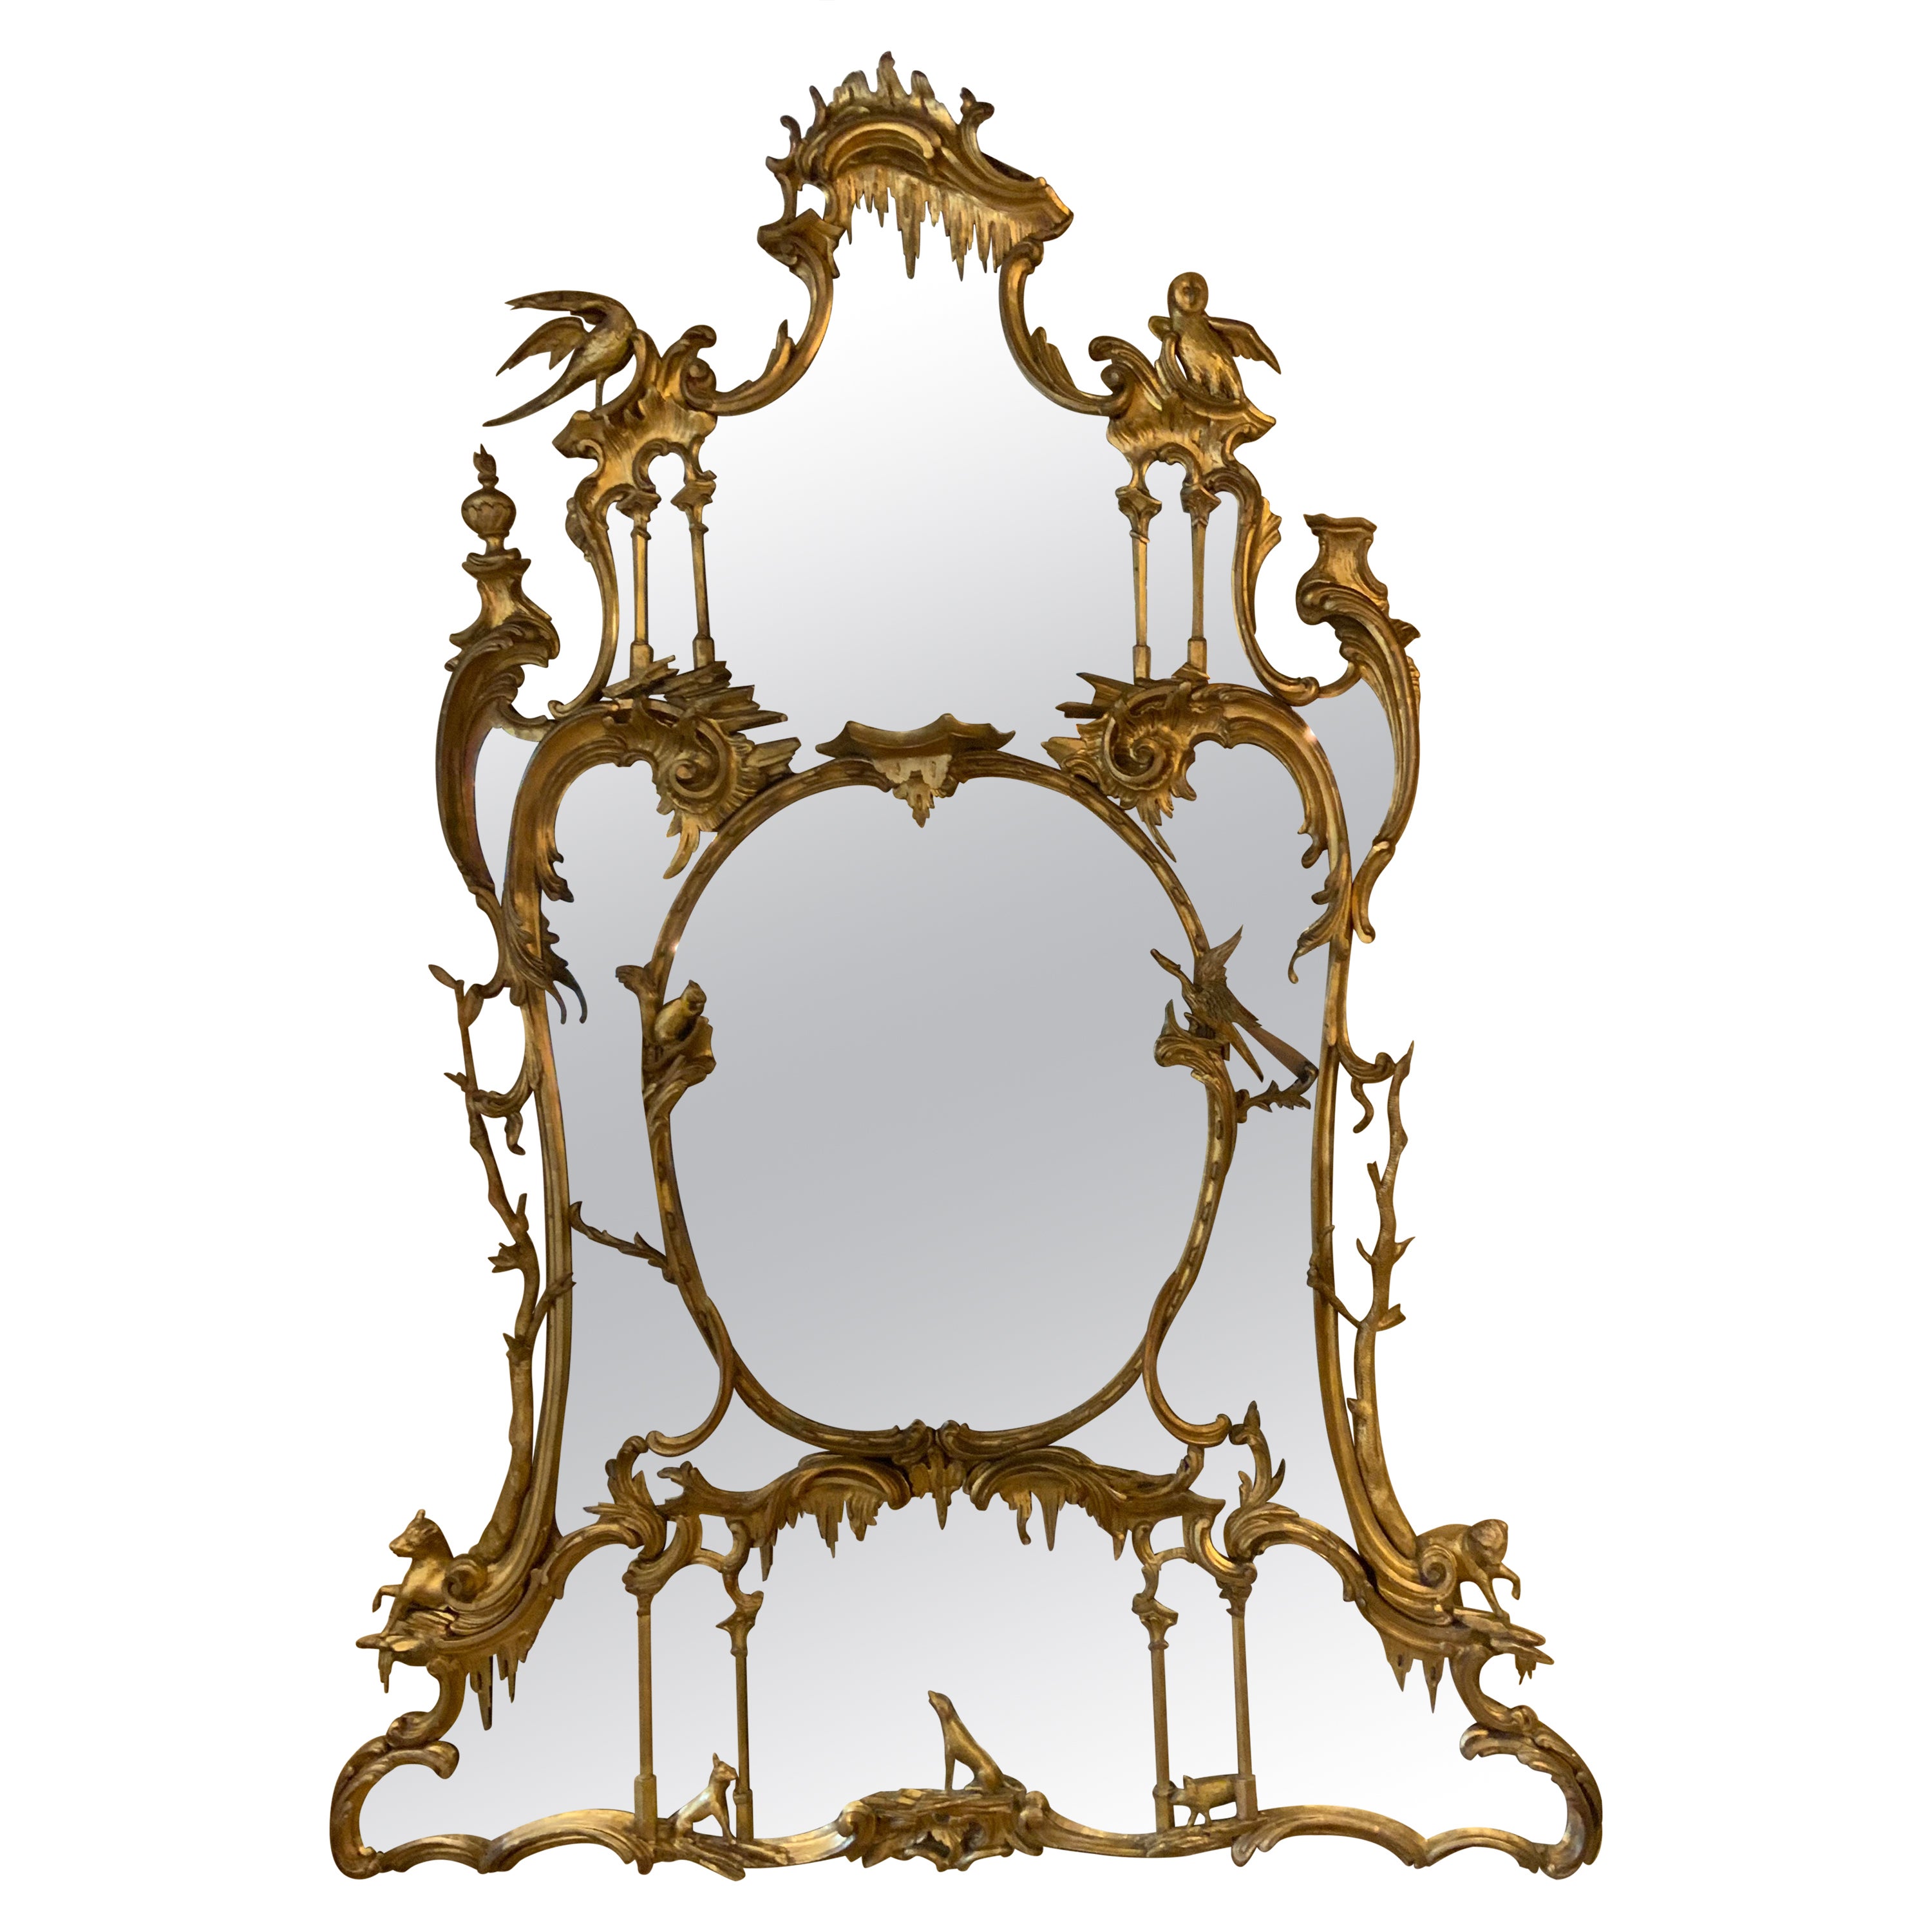 18th Century Period Gilt Carved Wood Chippendale Mirror After Thomas Johnson